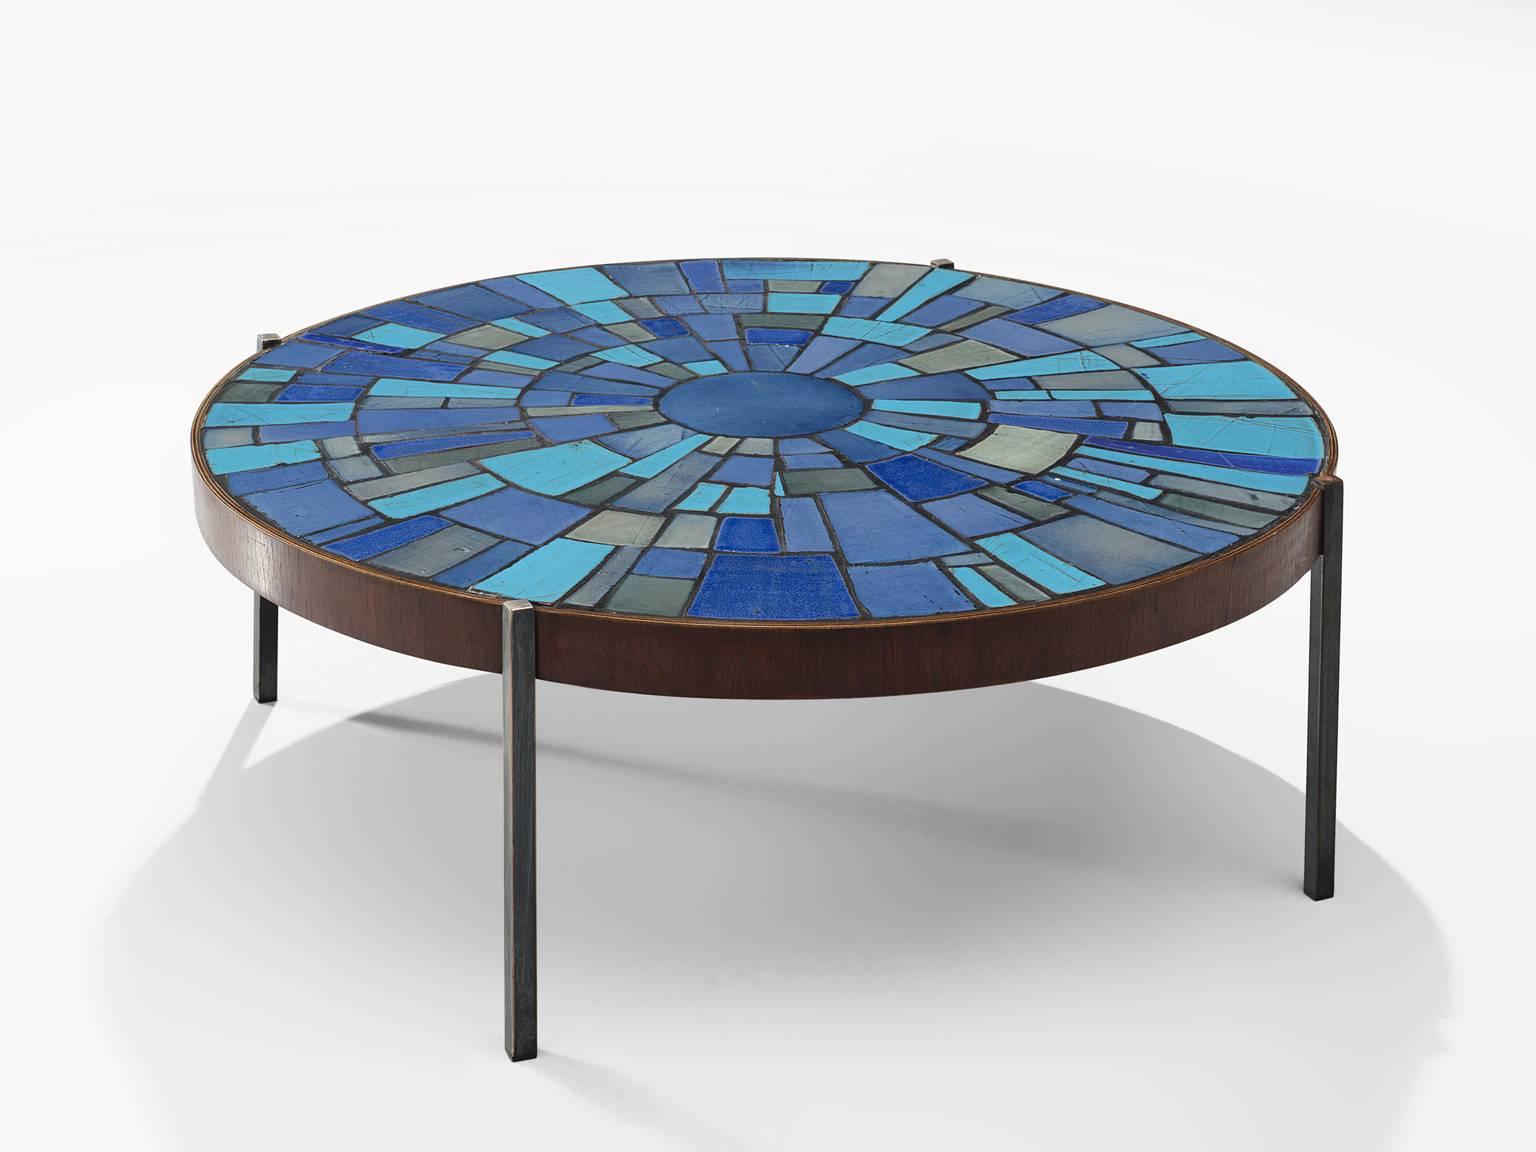 Rogier Vandeweghe for Amphora, cocktail table, blue ceramic, wood, iron, Belgium, circa 1950

This inlayed mosaic round coffee table displays a vivid colour scheme of different blues. Ranging from aquamarine to soft grey, the table is vivid and